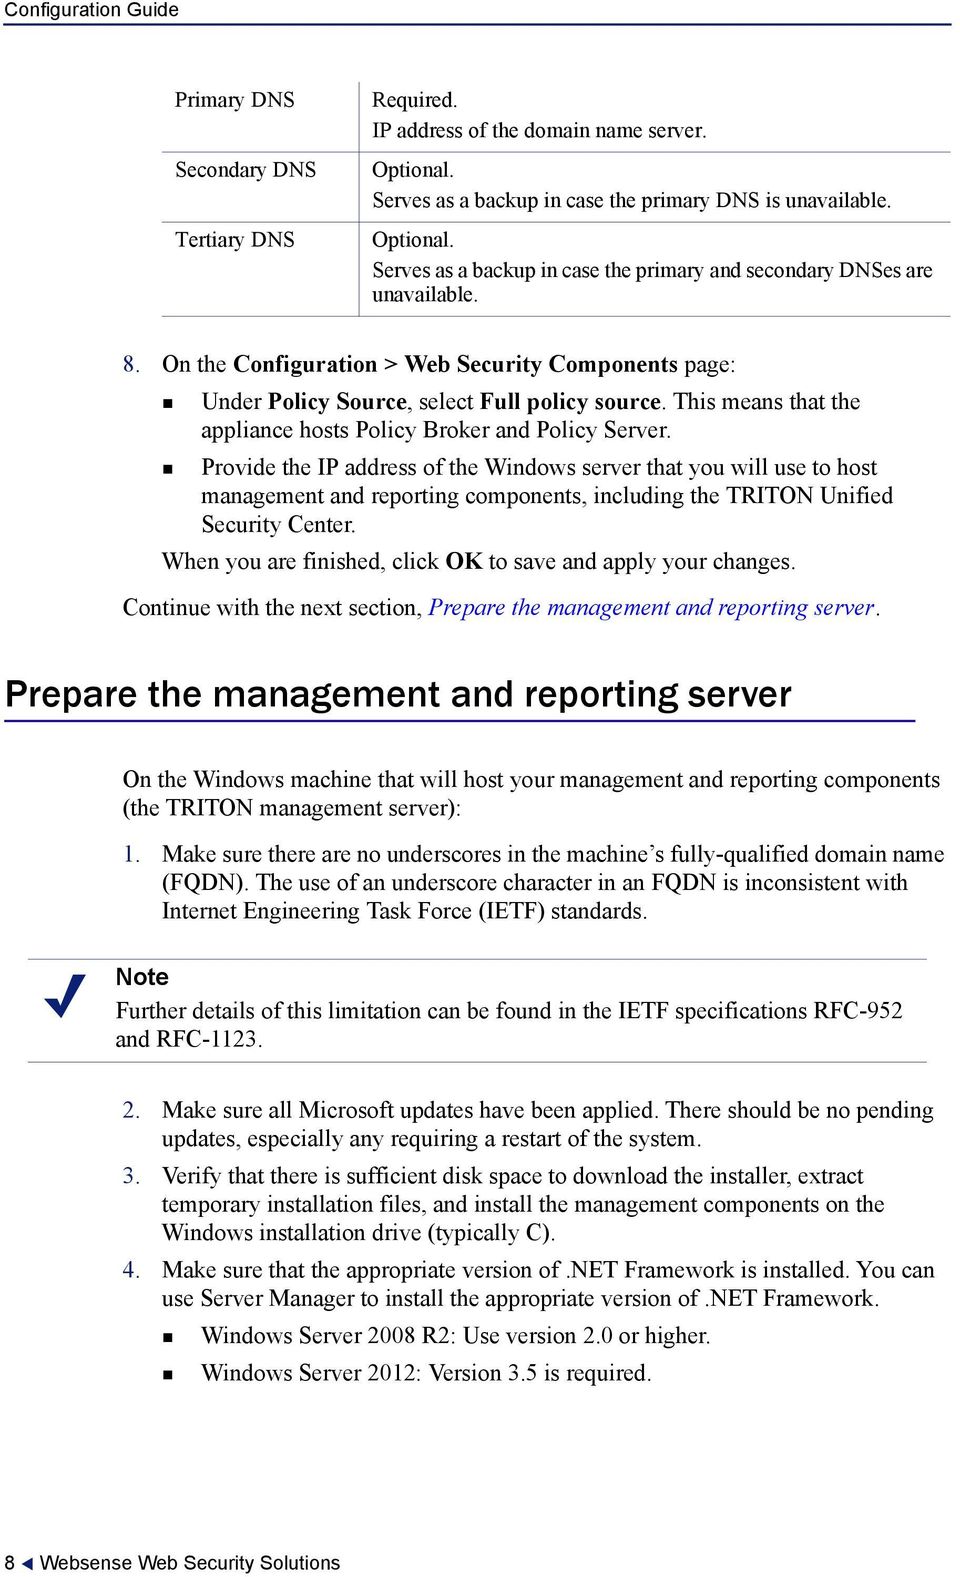 Provide the IP address of the Windows server that you will use to host management and reporting components, including the TRITON Unified Security Center.